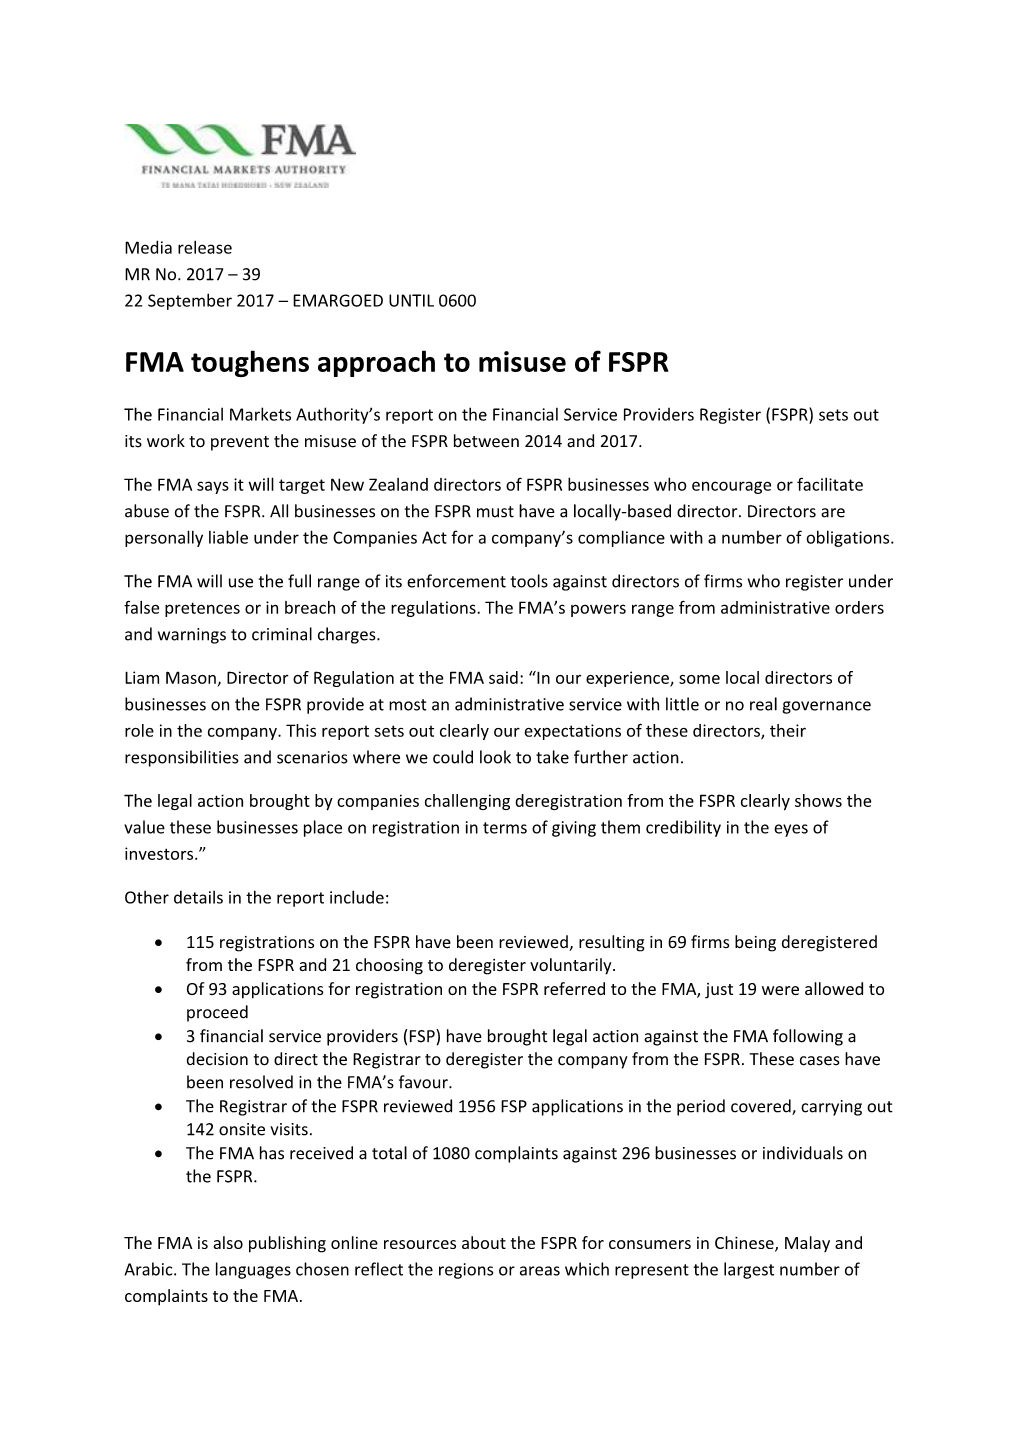 FMA Toughens Approach to Misuse of FSPR